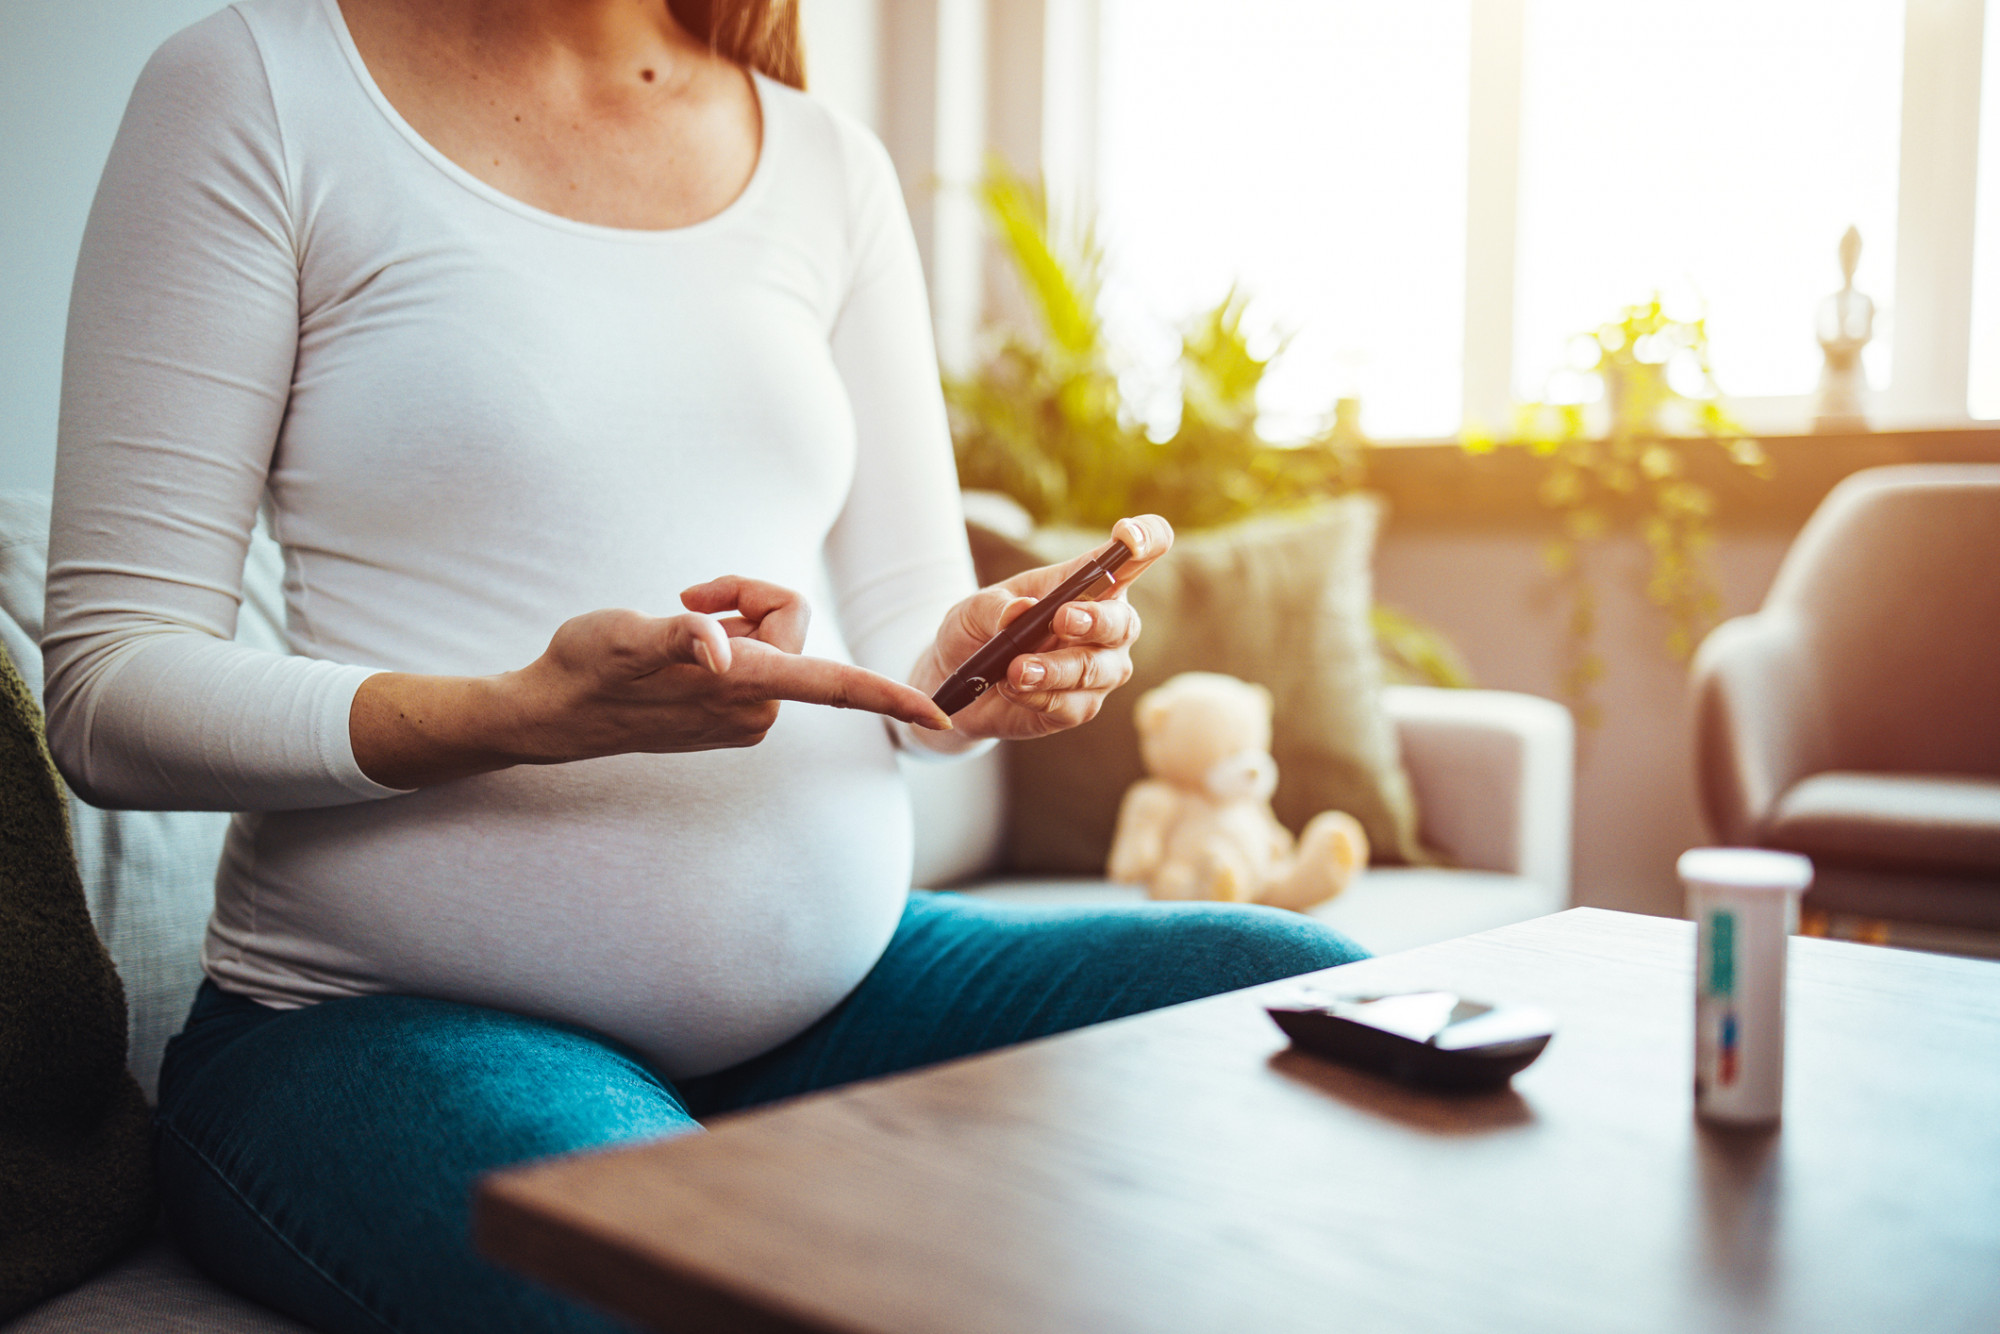 Gestational diabetes: Reference values ​​vary depending on the type of test performed